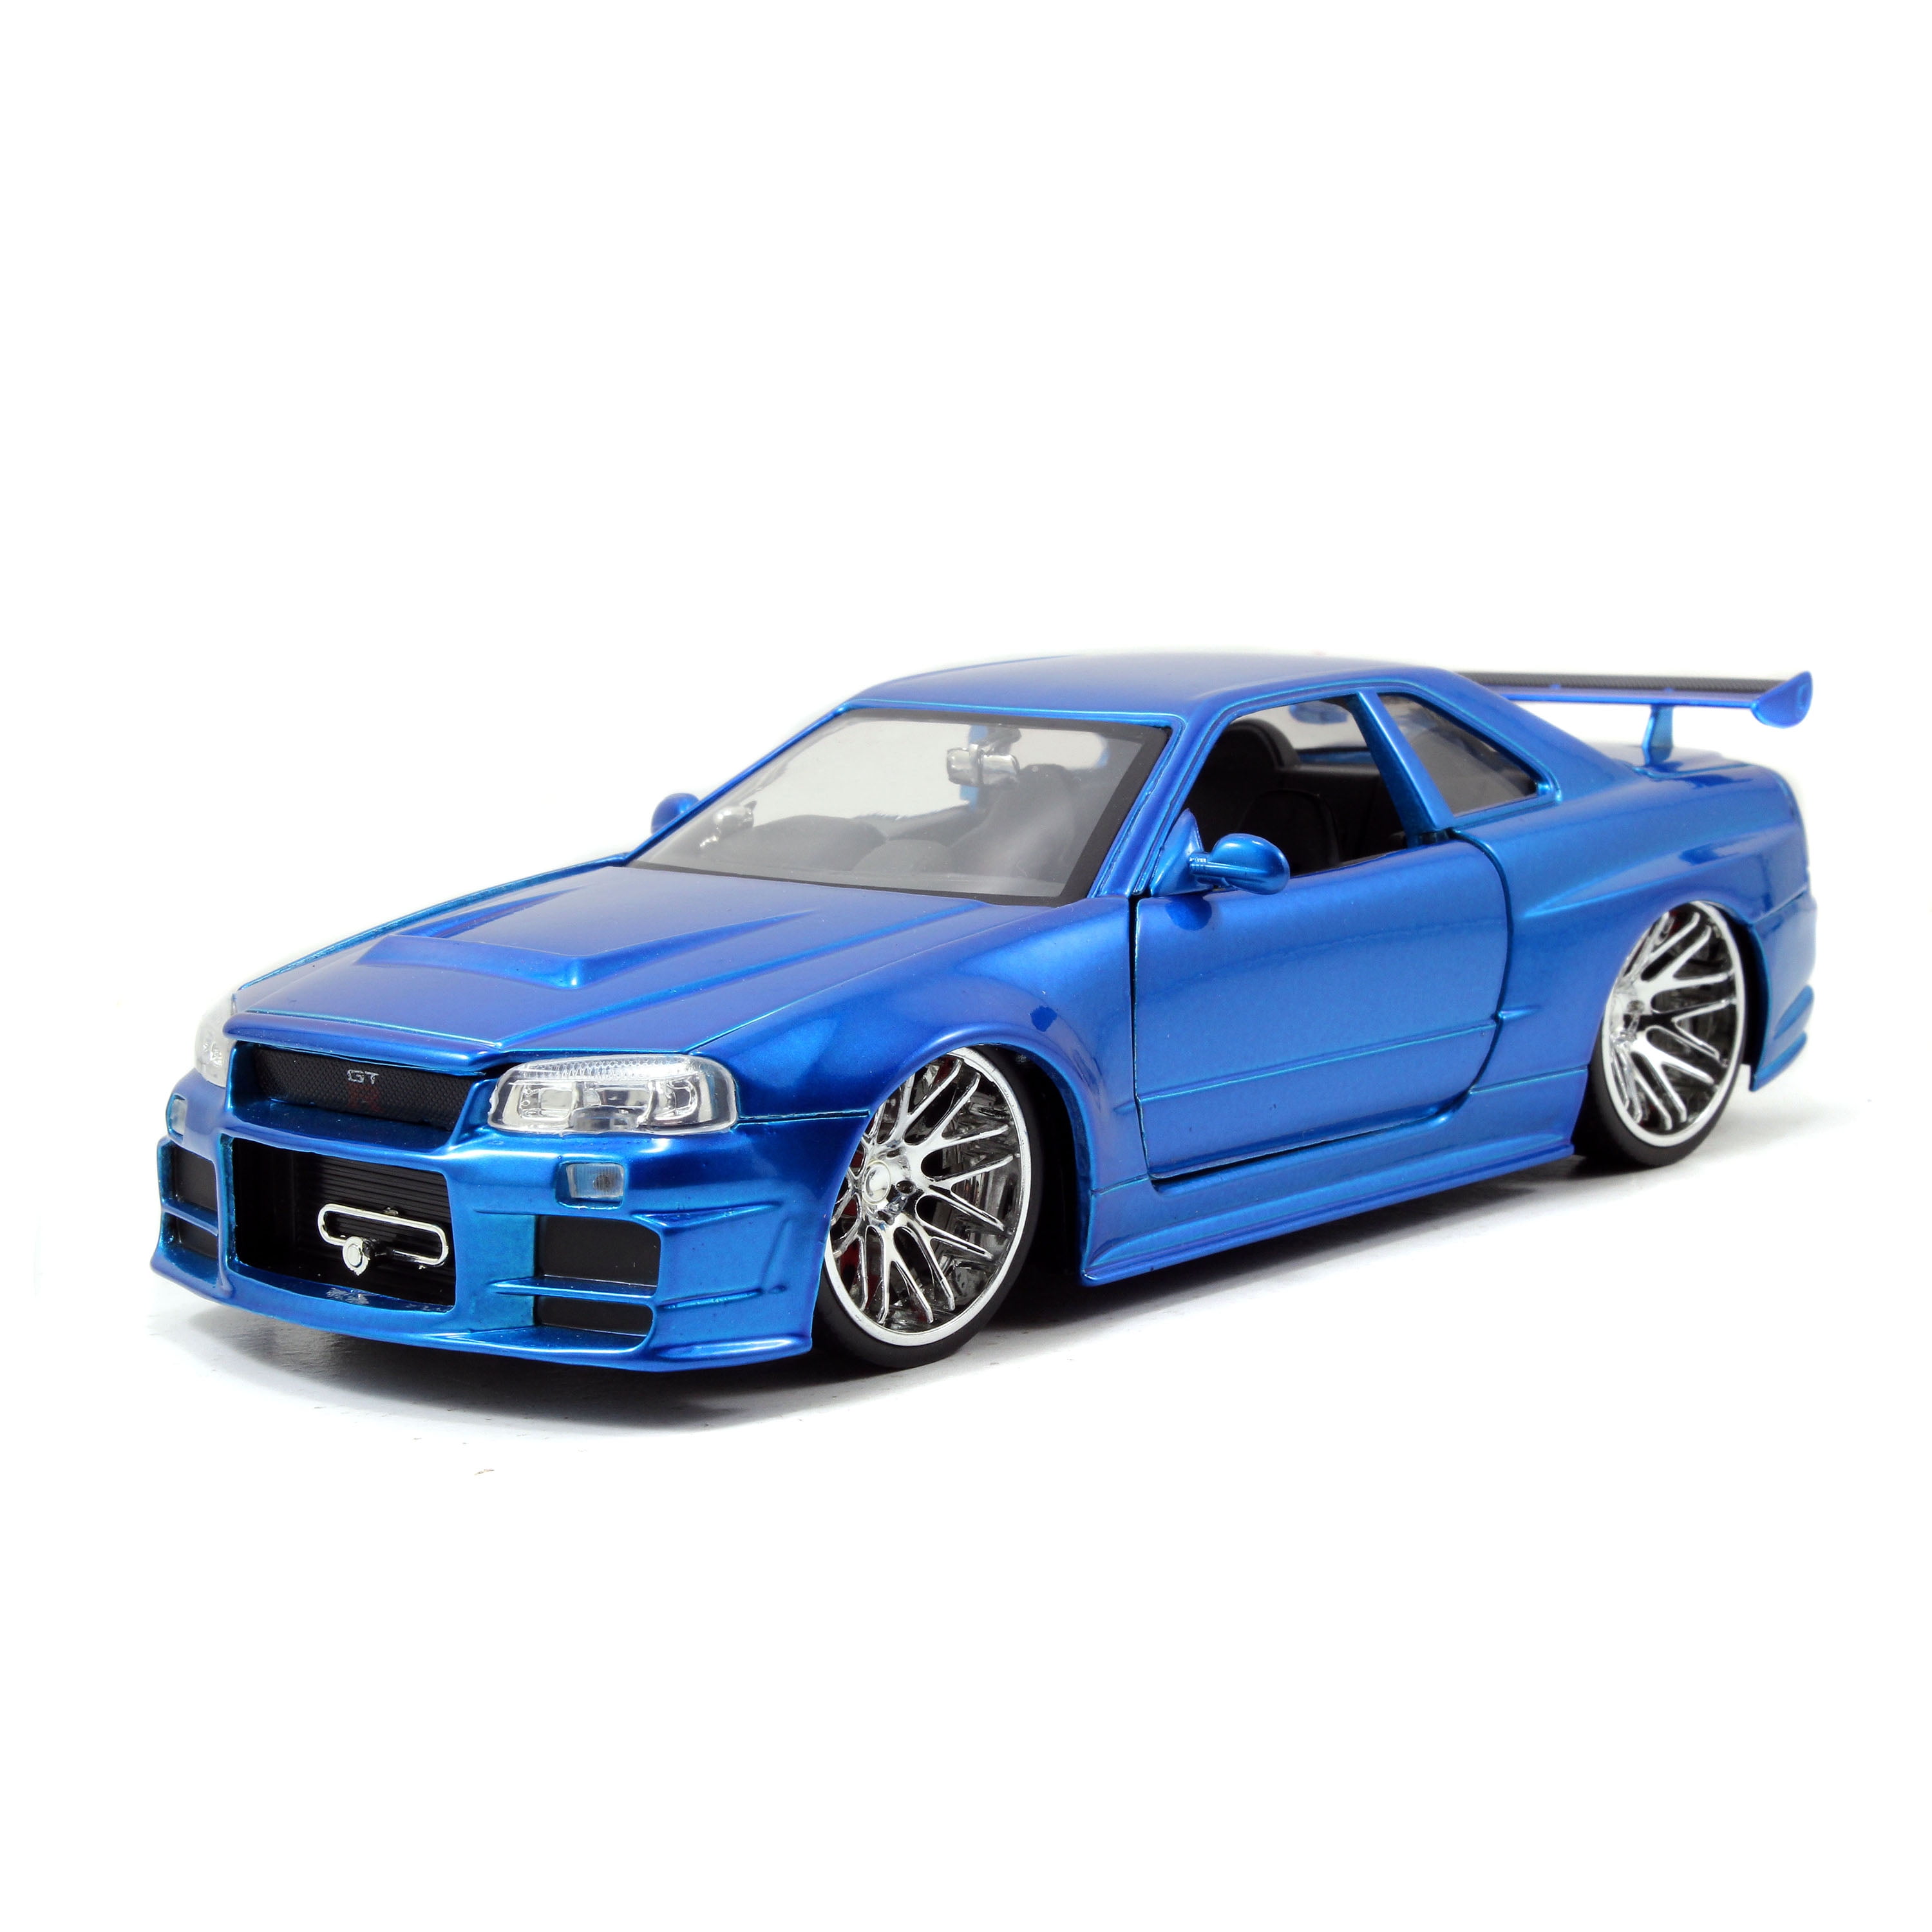 The Fast and the Furious NEW Joy Ride Sweet Nitro Mitsubishi Eclipse Toy Car